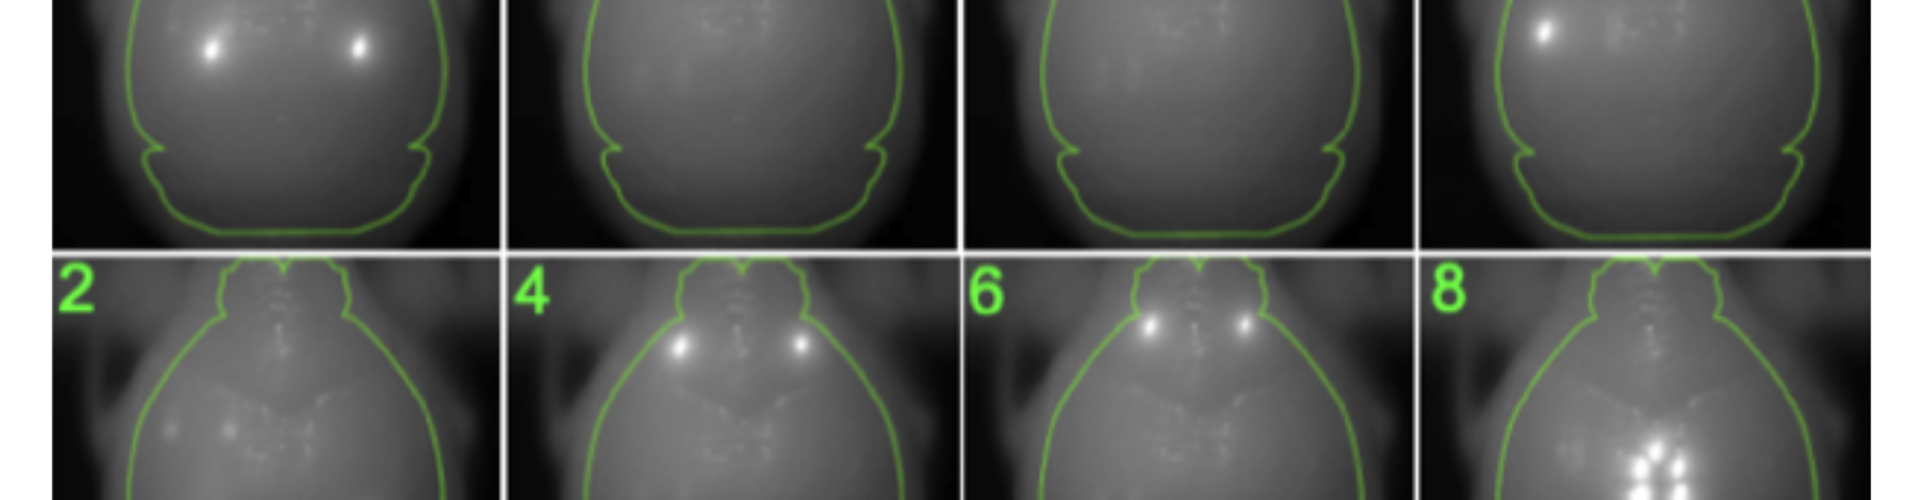 Images showing Zapit targeted stimulation light to 8 different ’stimulus’ patterns consisting of different bilateral and unilateral target points